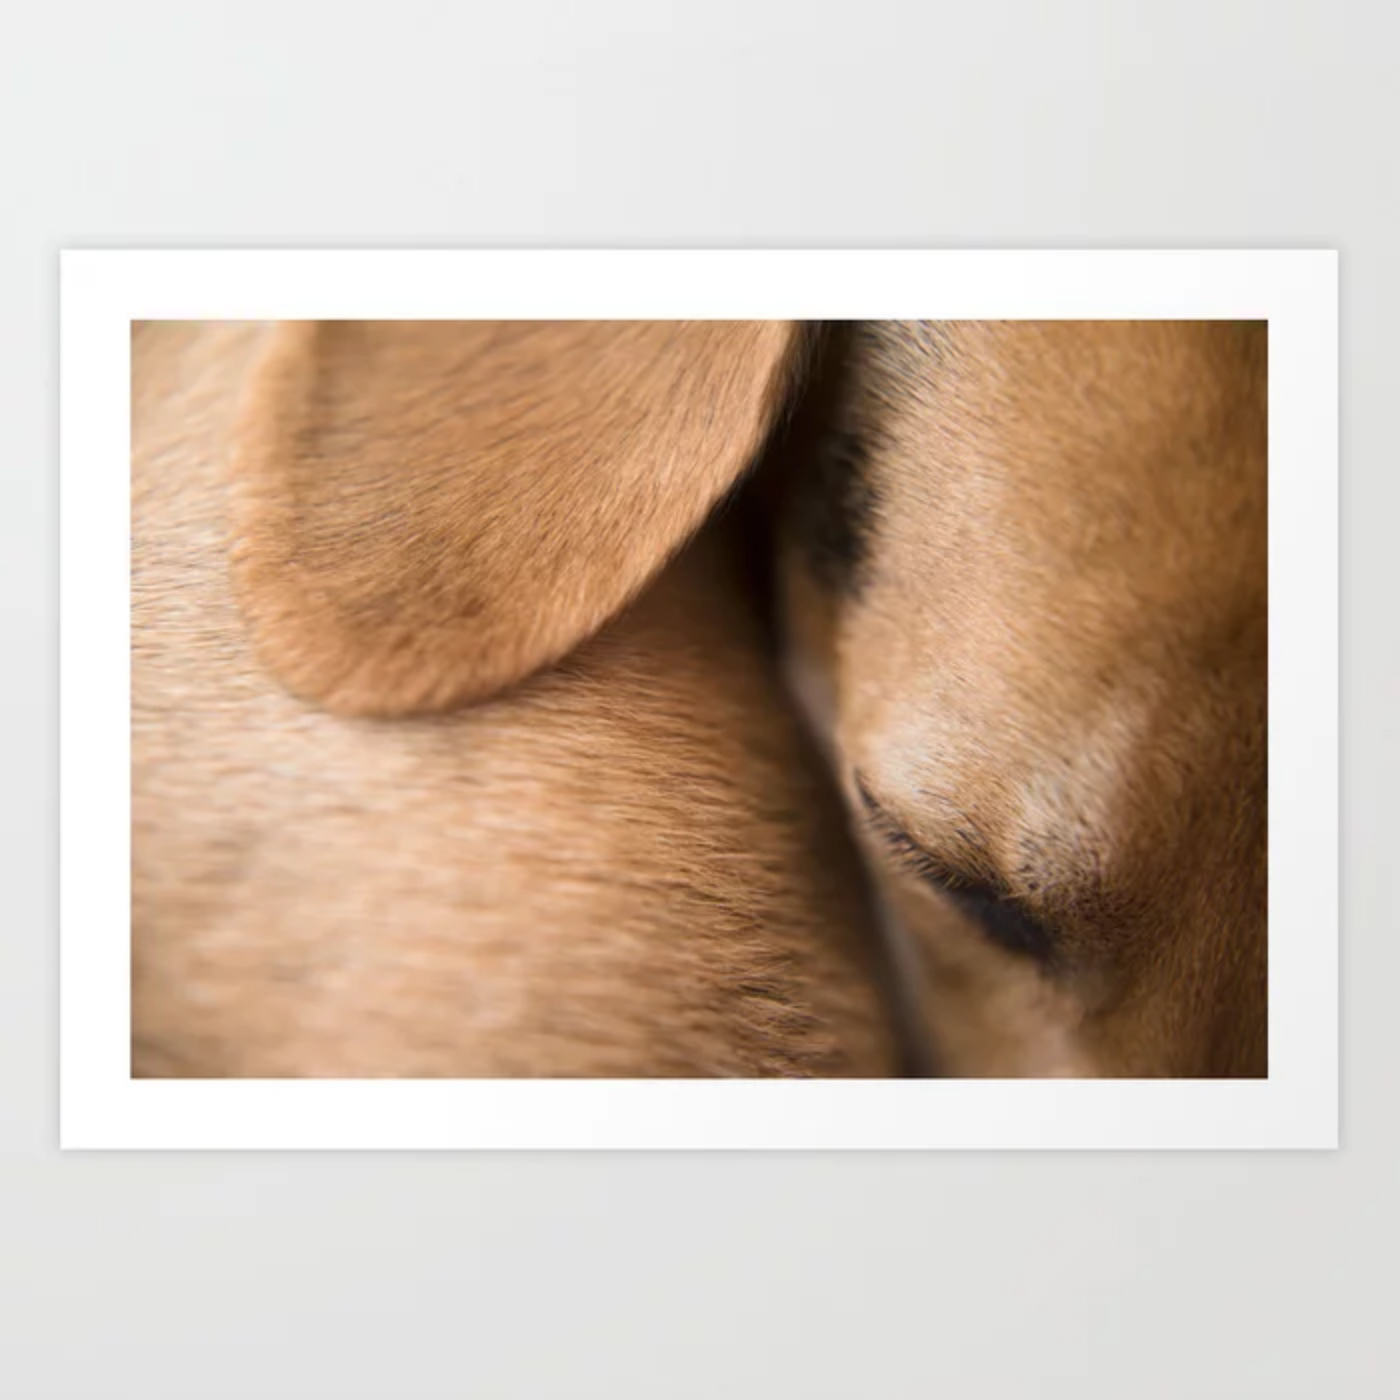 DOGvision, Fenne Kustermans, gifts for dog lovers, art prints, and wall art for dog lovers, www.DOGvision.eu - society6.com/dogvision